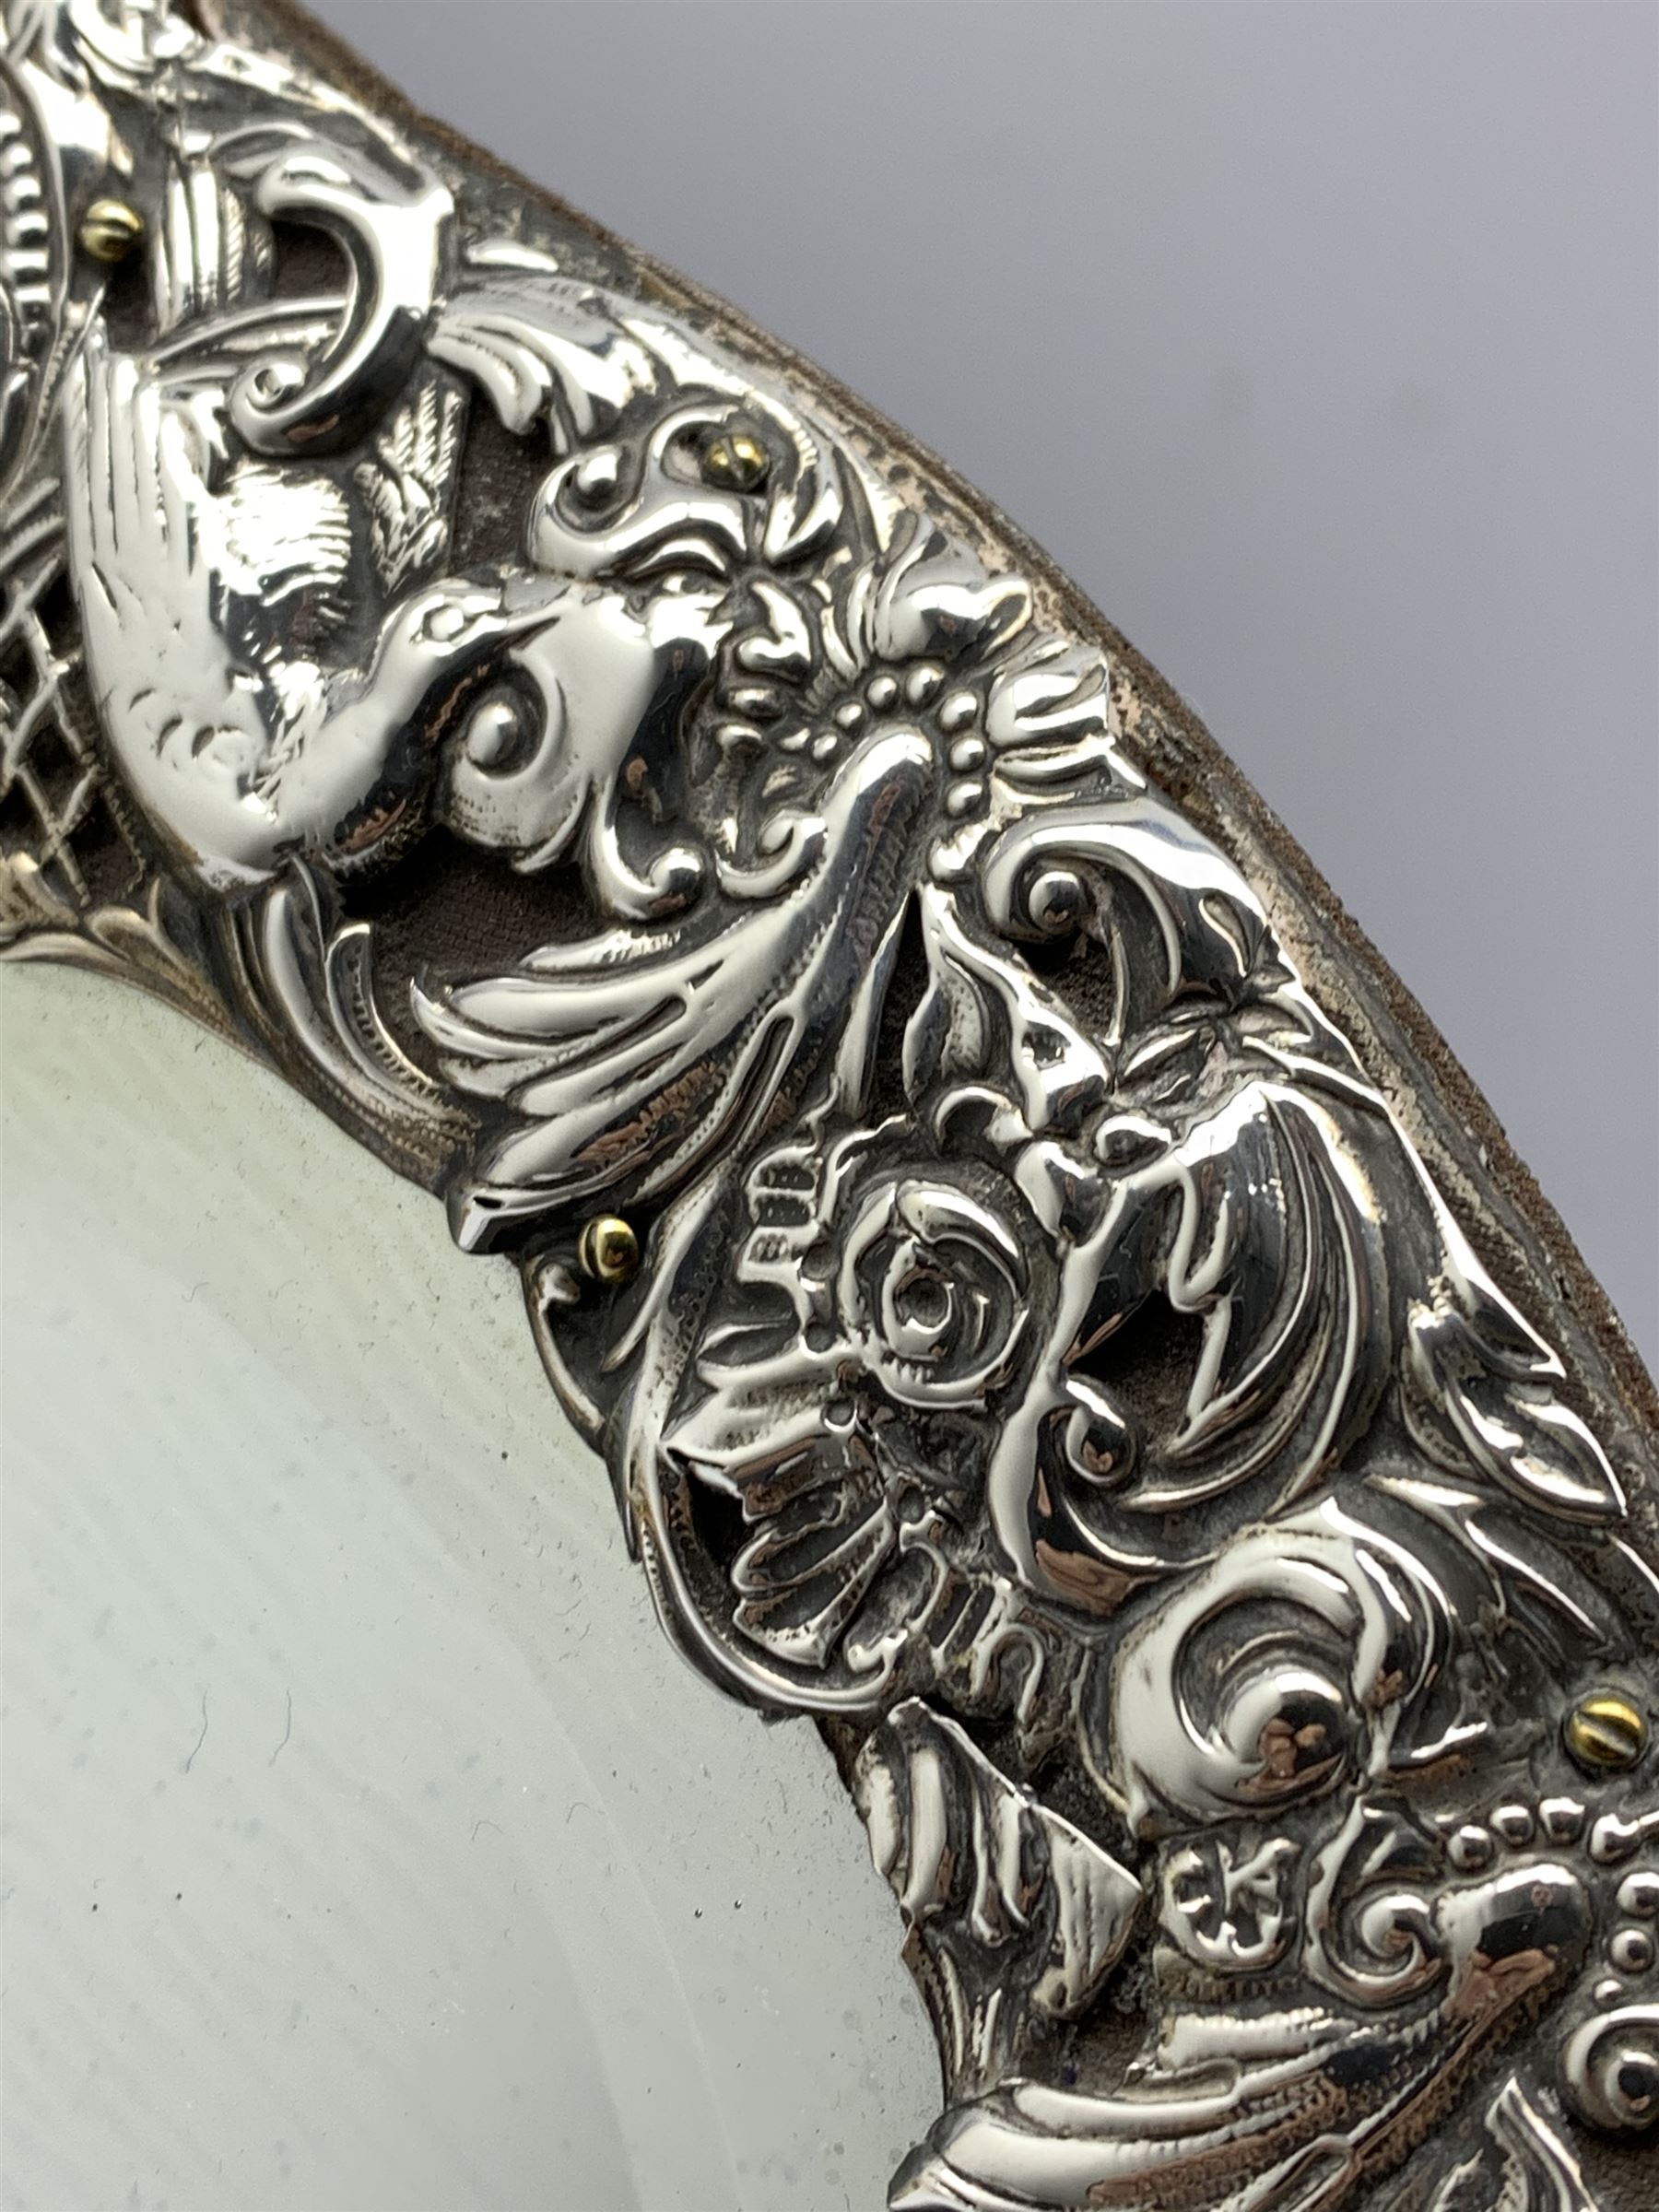 Edwardian silver heart shape dressing table mirror with embossed bird and scroll decoration - Image 2 of 2